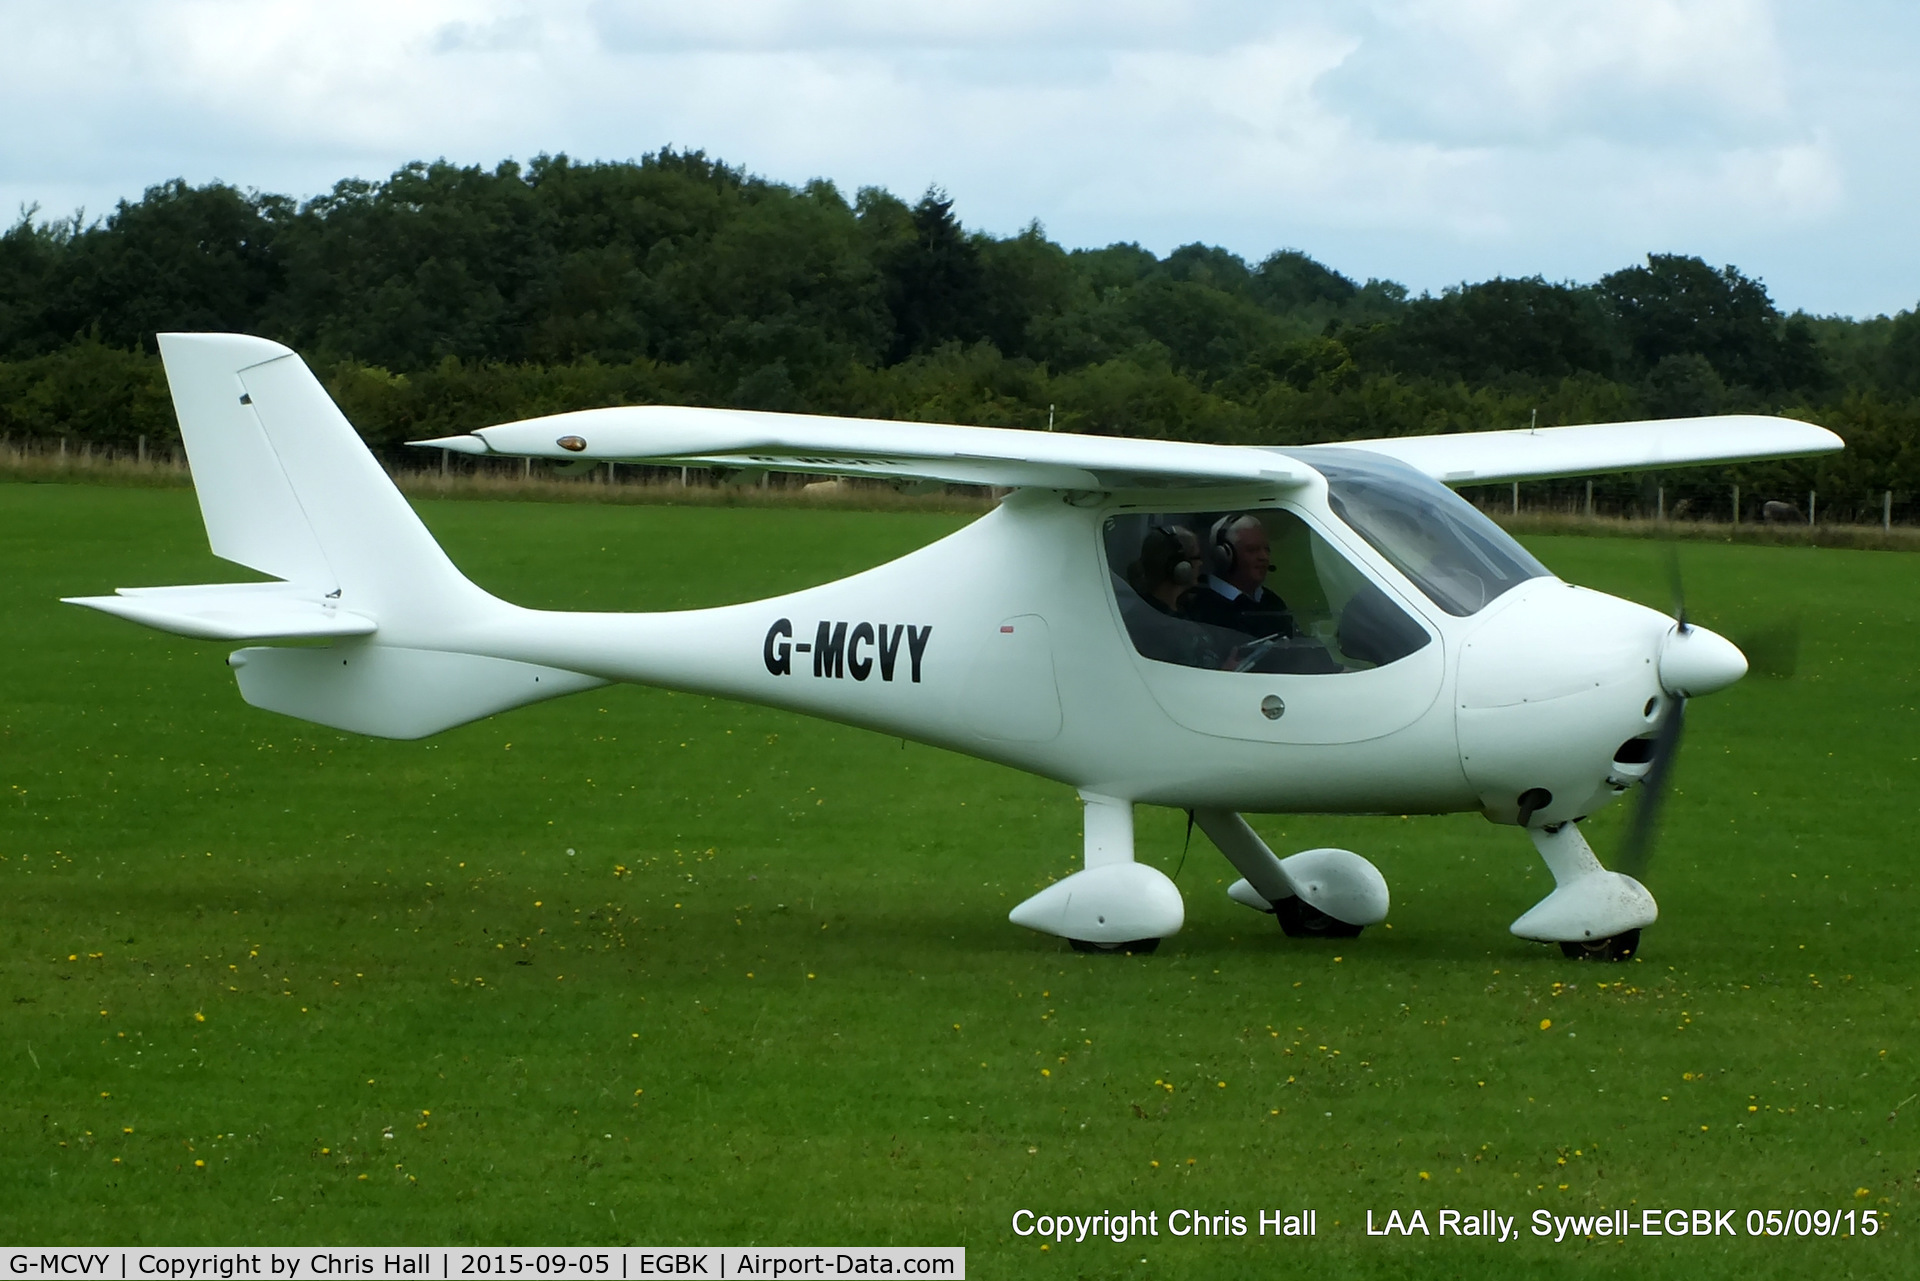 G-MCVY, 2002 Flight Design CT2K C/N 7887, at the LAA Rally 2015, Sywell